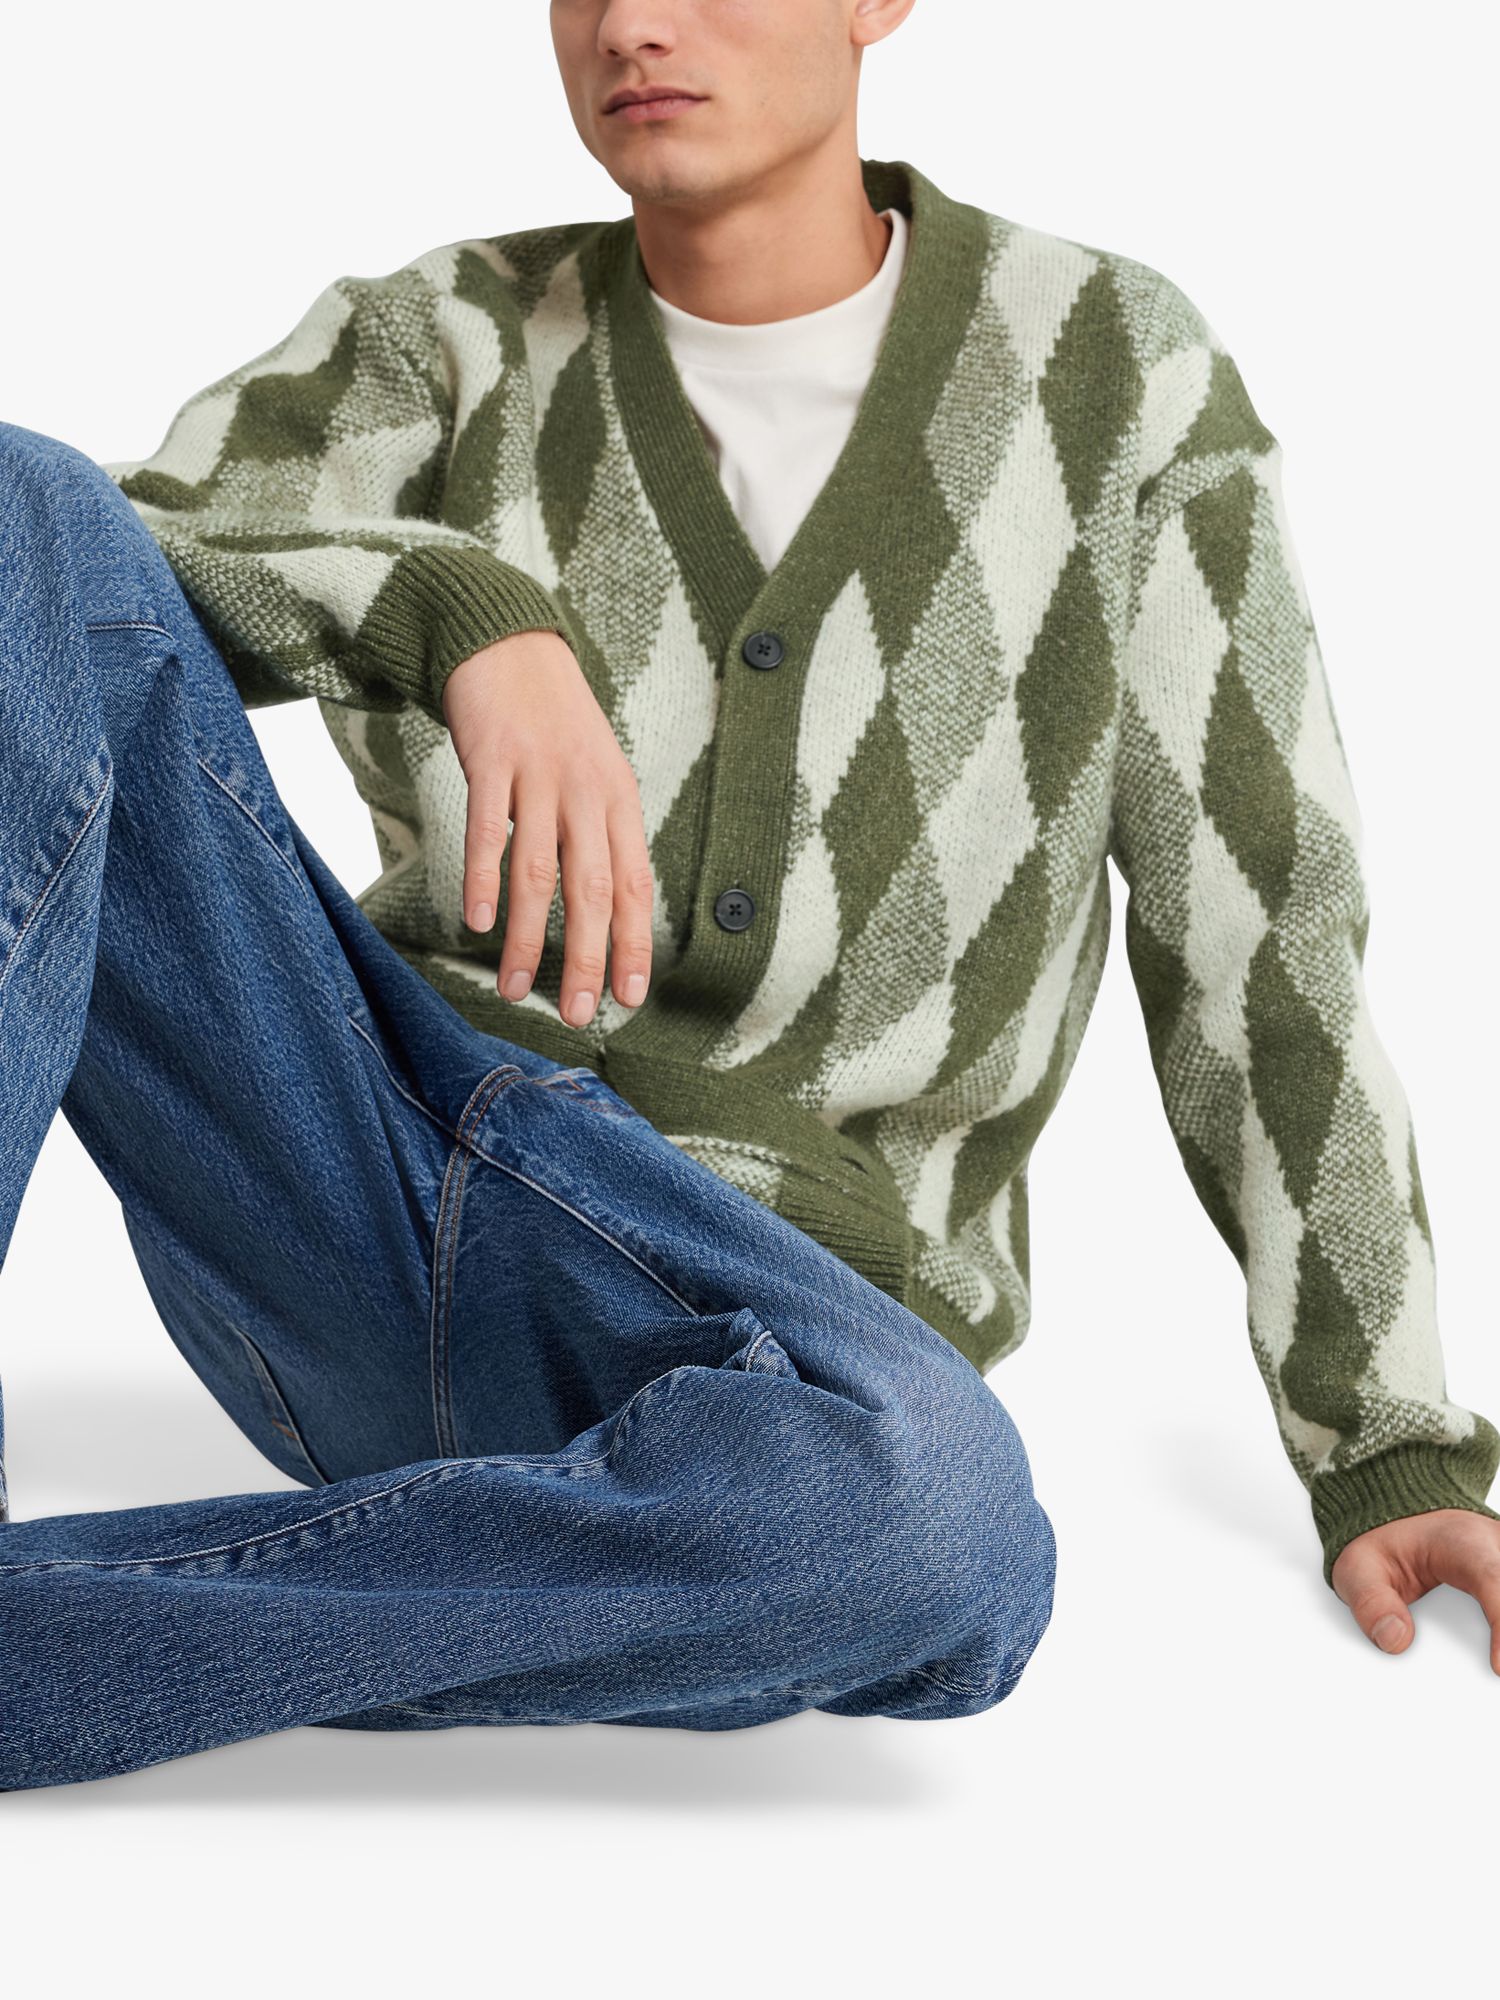 Buy SELECTED HOMME Knitted Long Sleeve Cardigan, Green/Multi Online at johnlewis.com